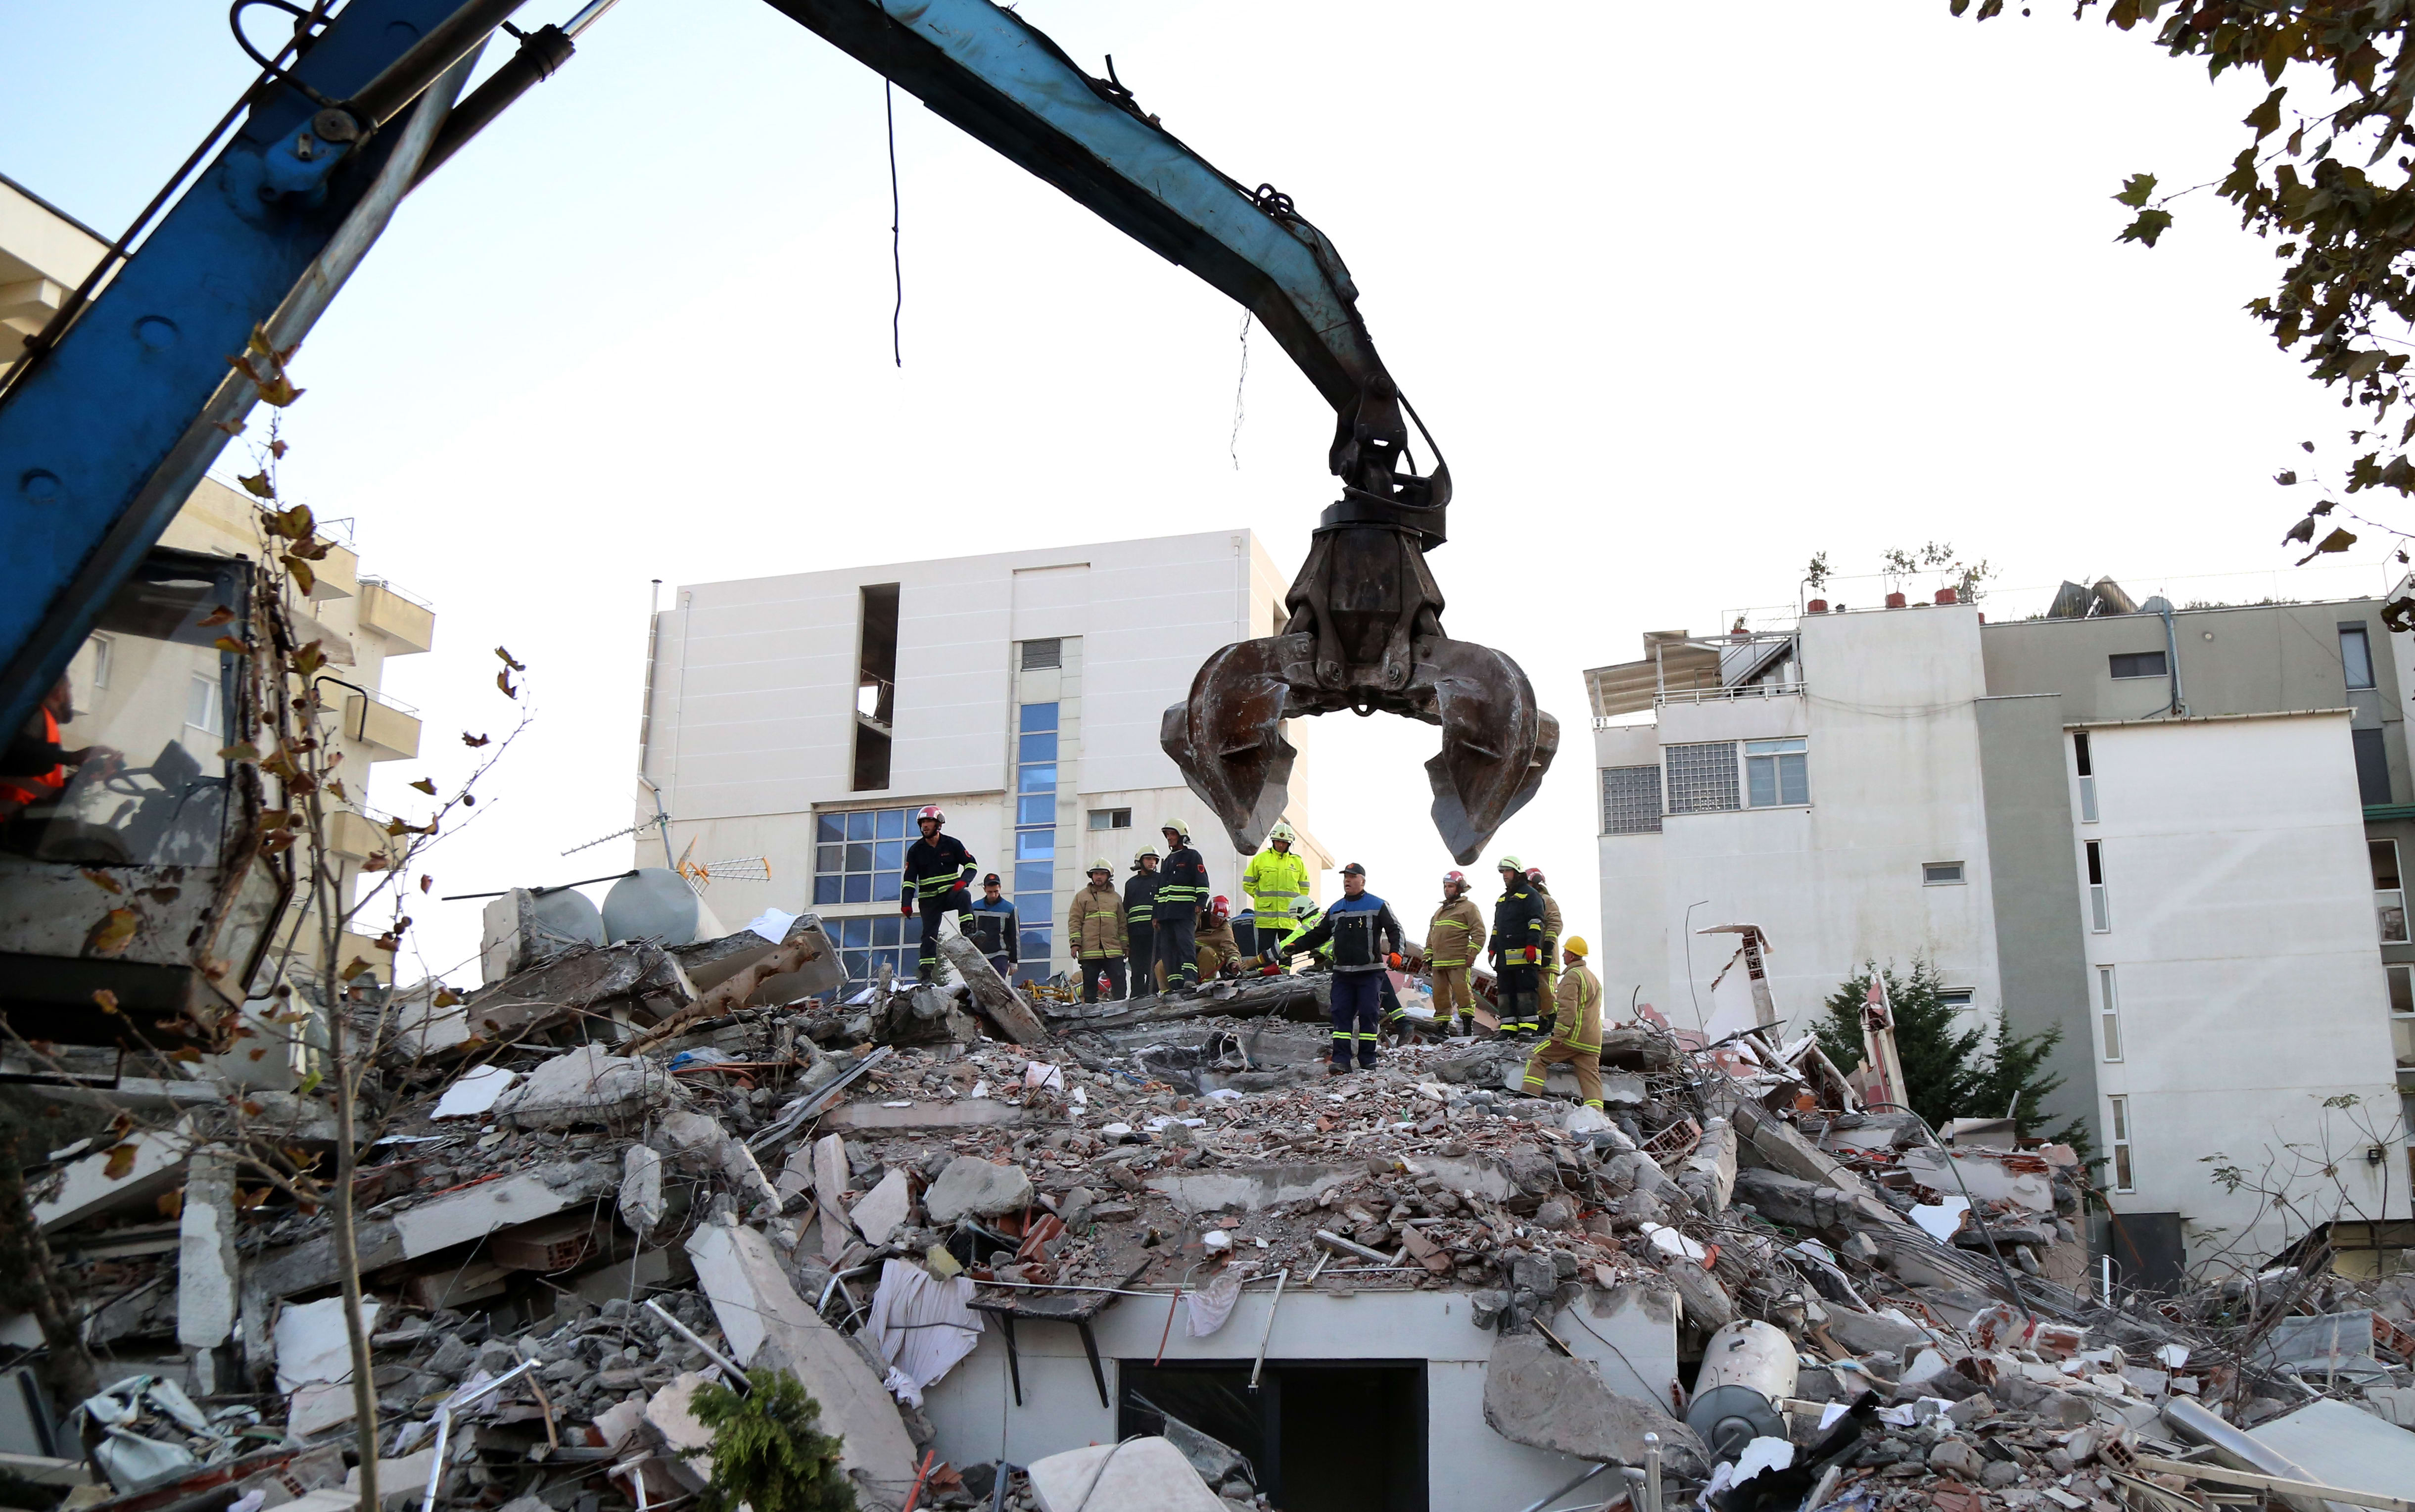 Emergency workers look for survivors trough the rubble of a damaged building in the coastal city of Durres, west of capital Tirana, after an earthquake hit Albania, on November 26, 2019.